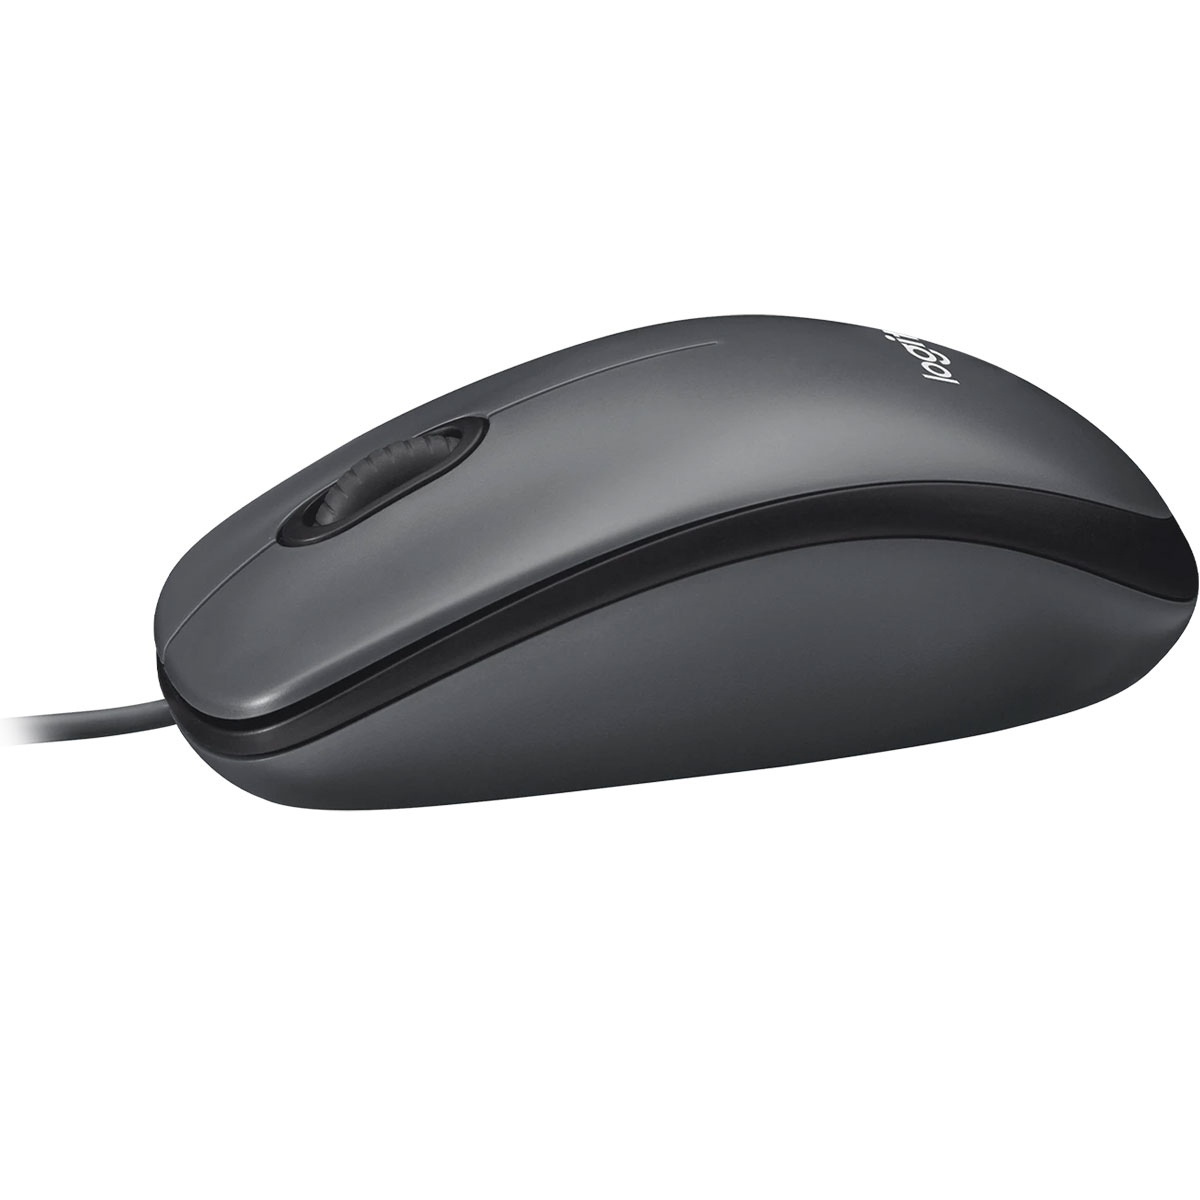 Logitech M100 Optical Wired Mouse